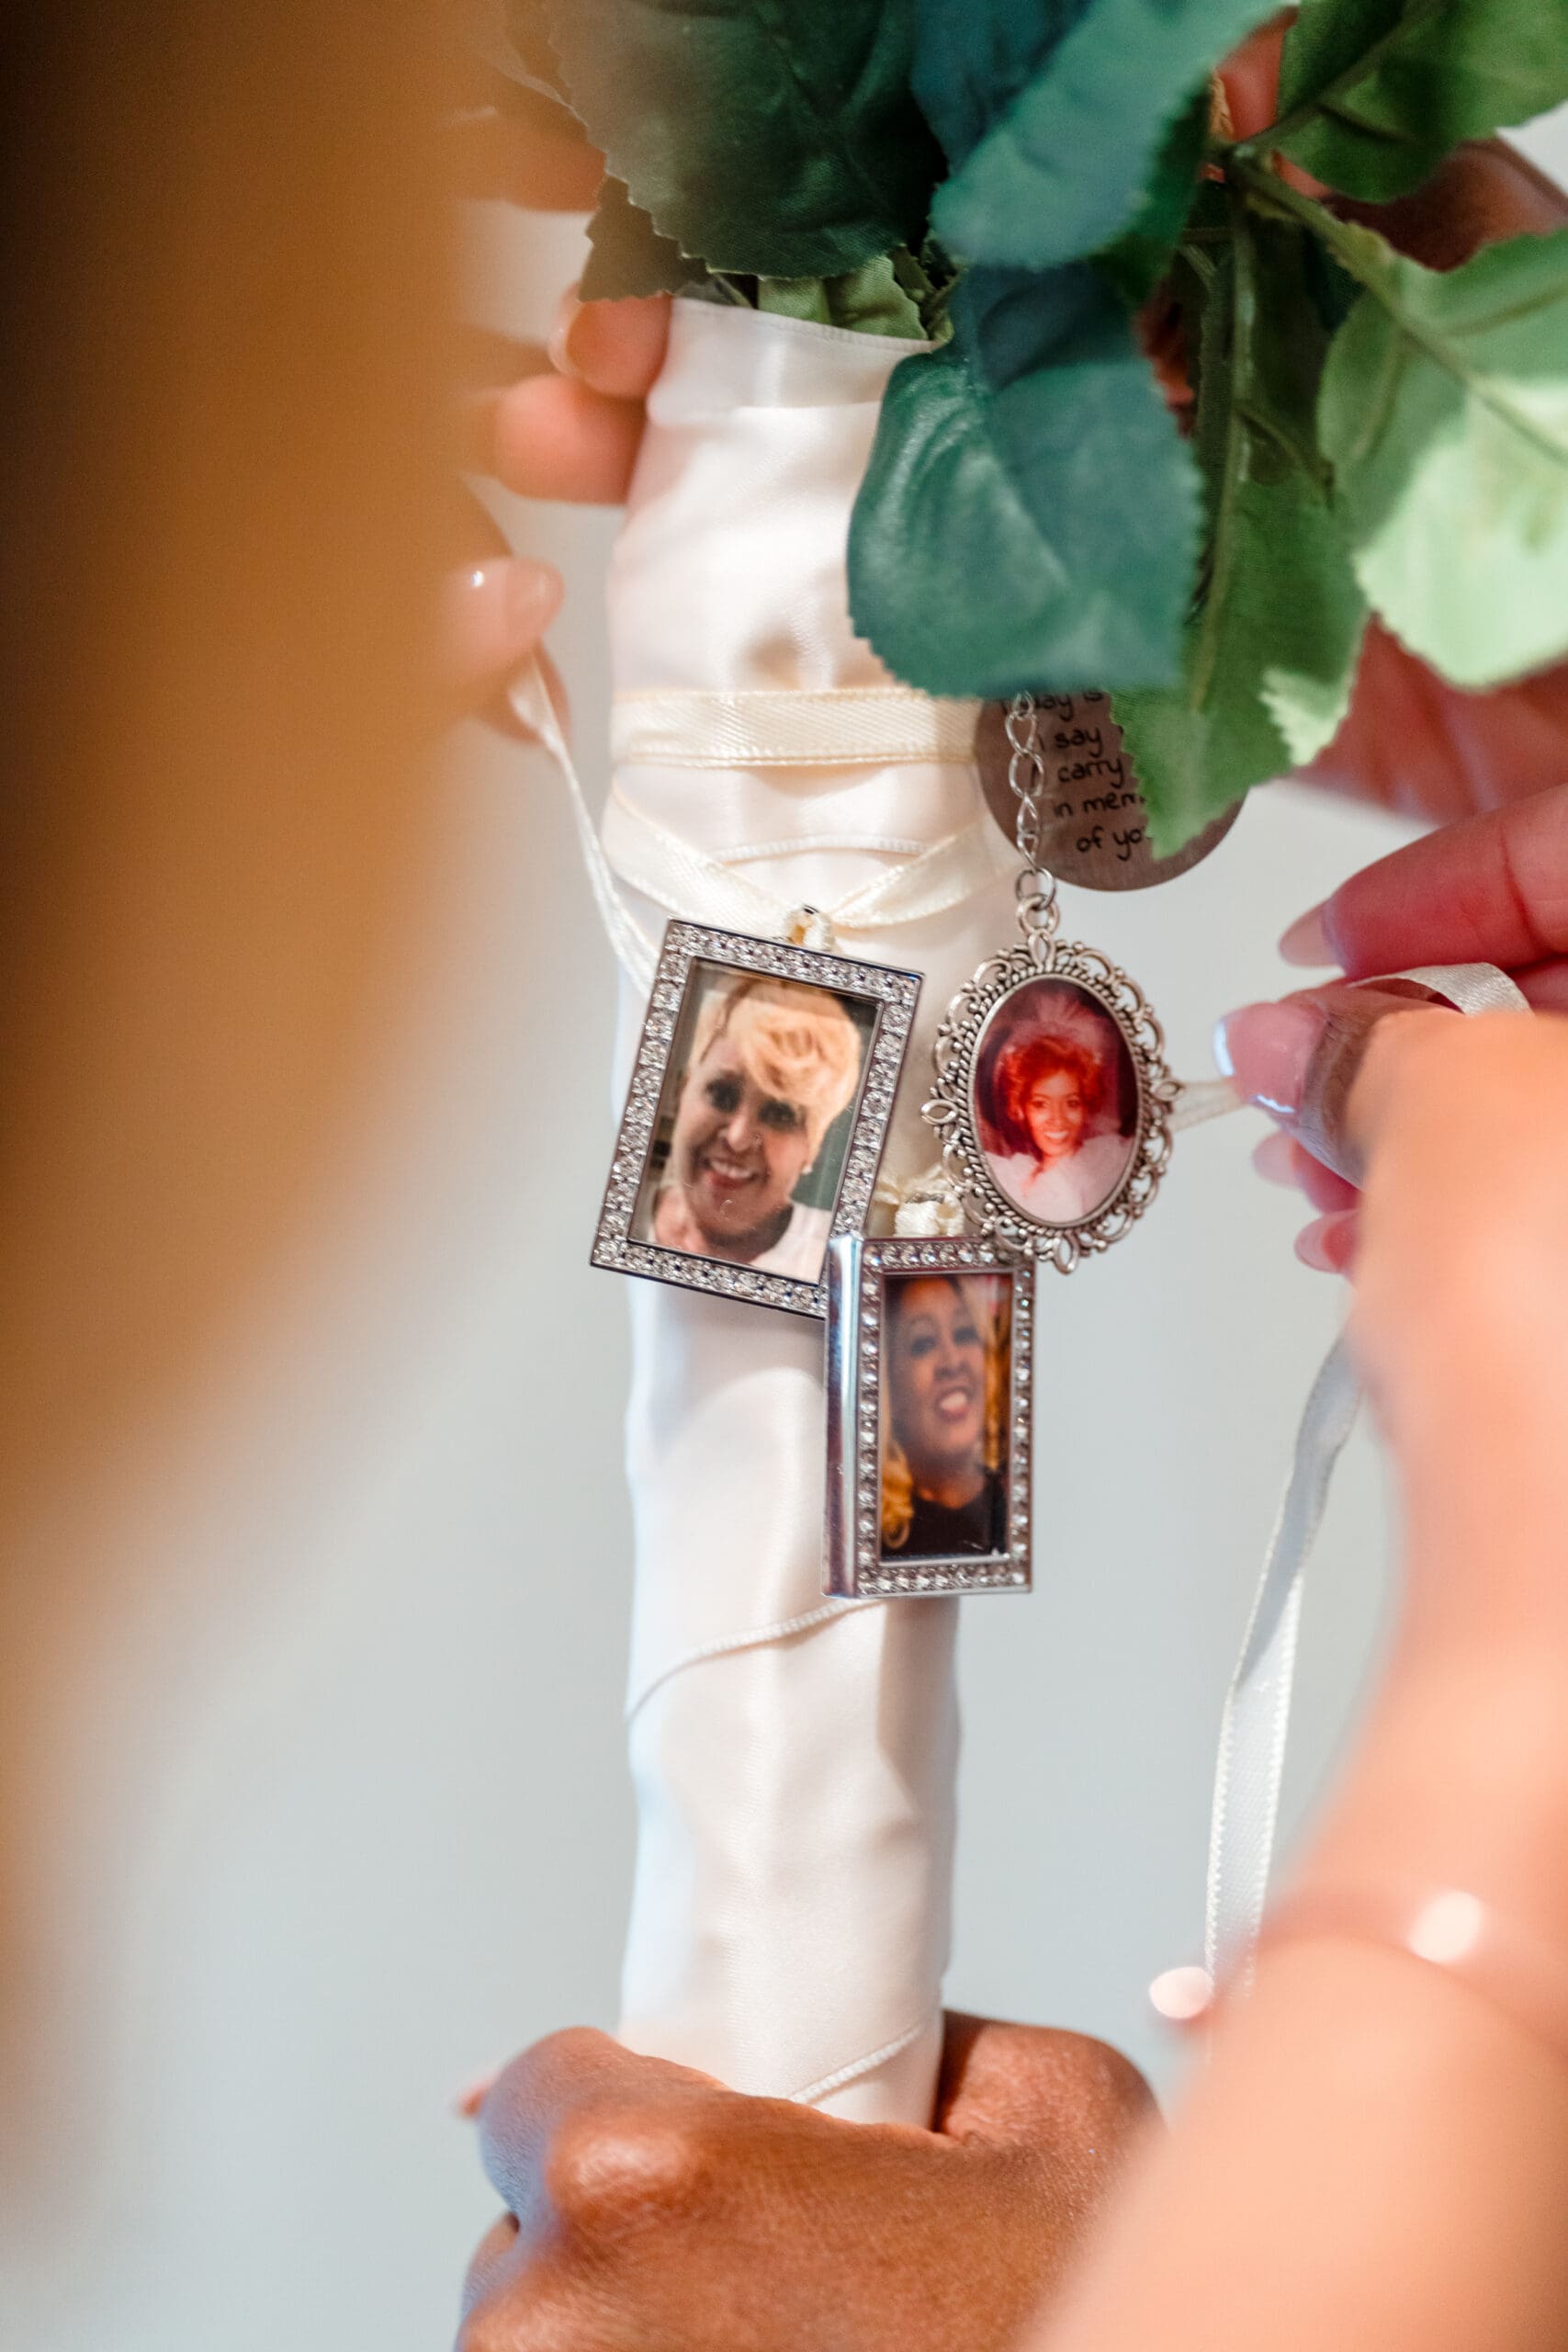 Charms with photos of loved ones attached to the base of Lateisha's bouquet.